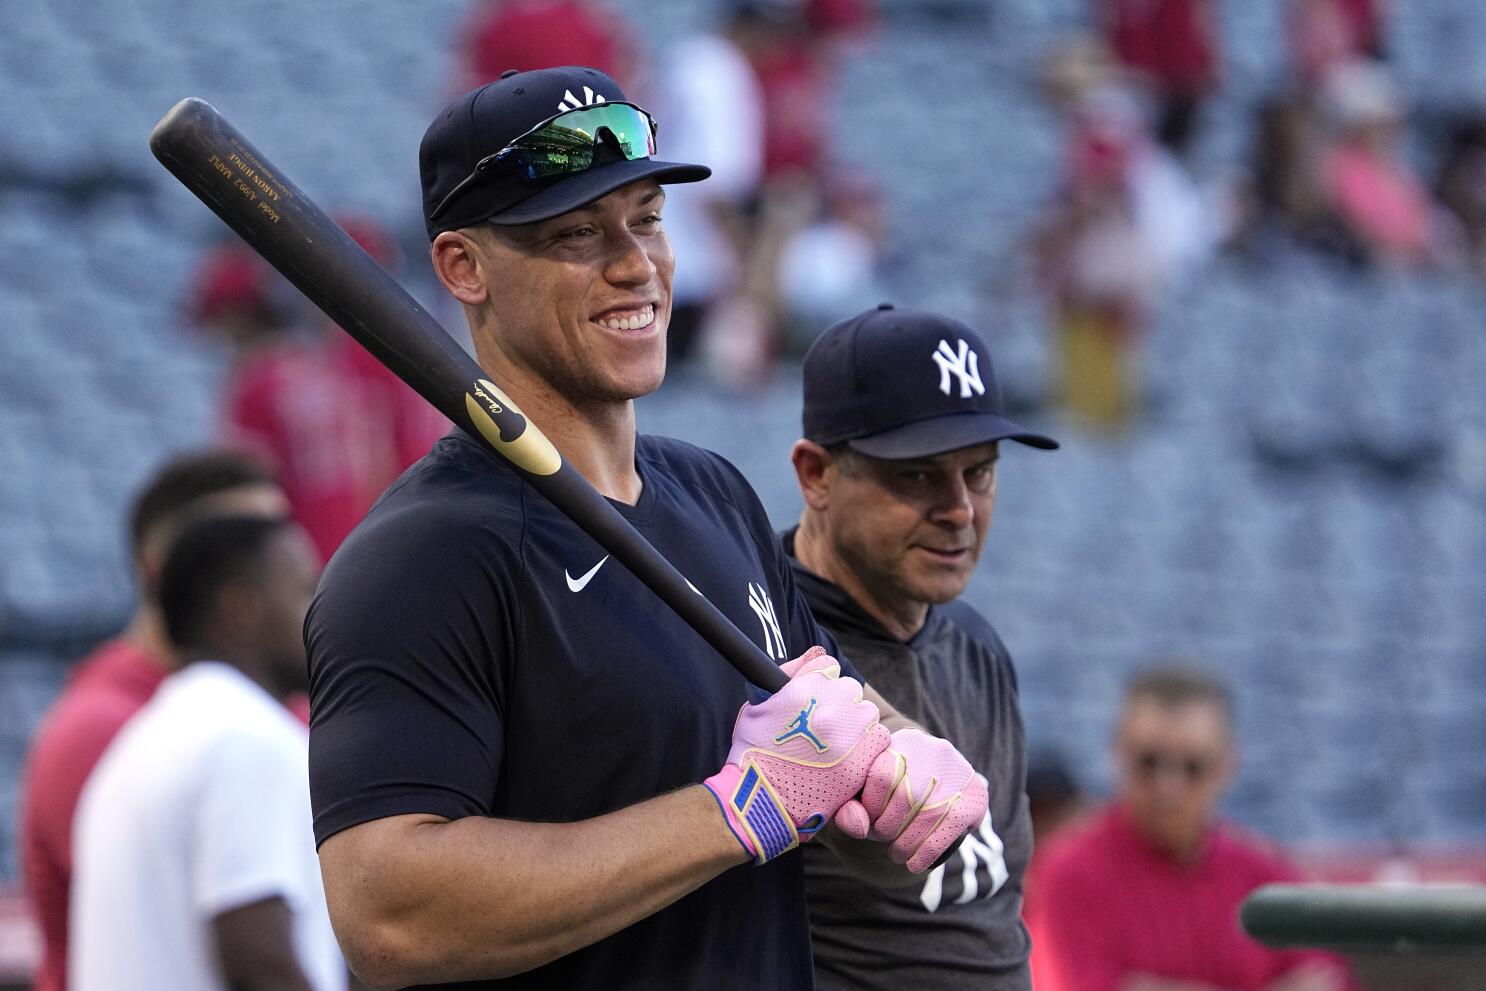 New York Yankees stars give back to the community for Hope Week